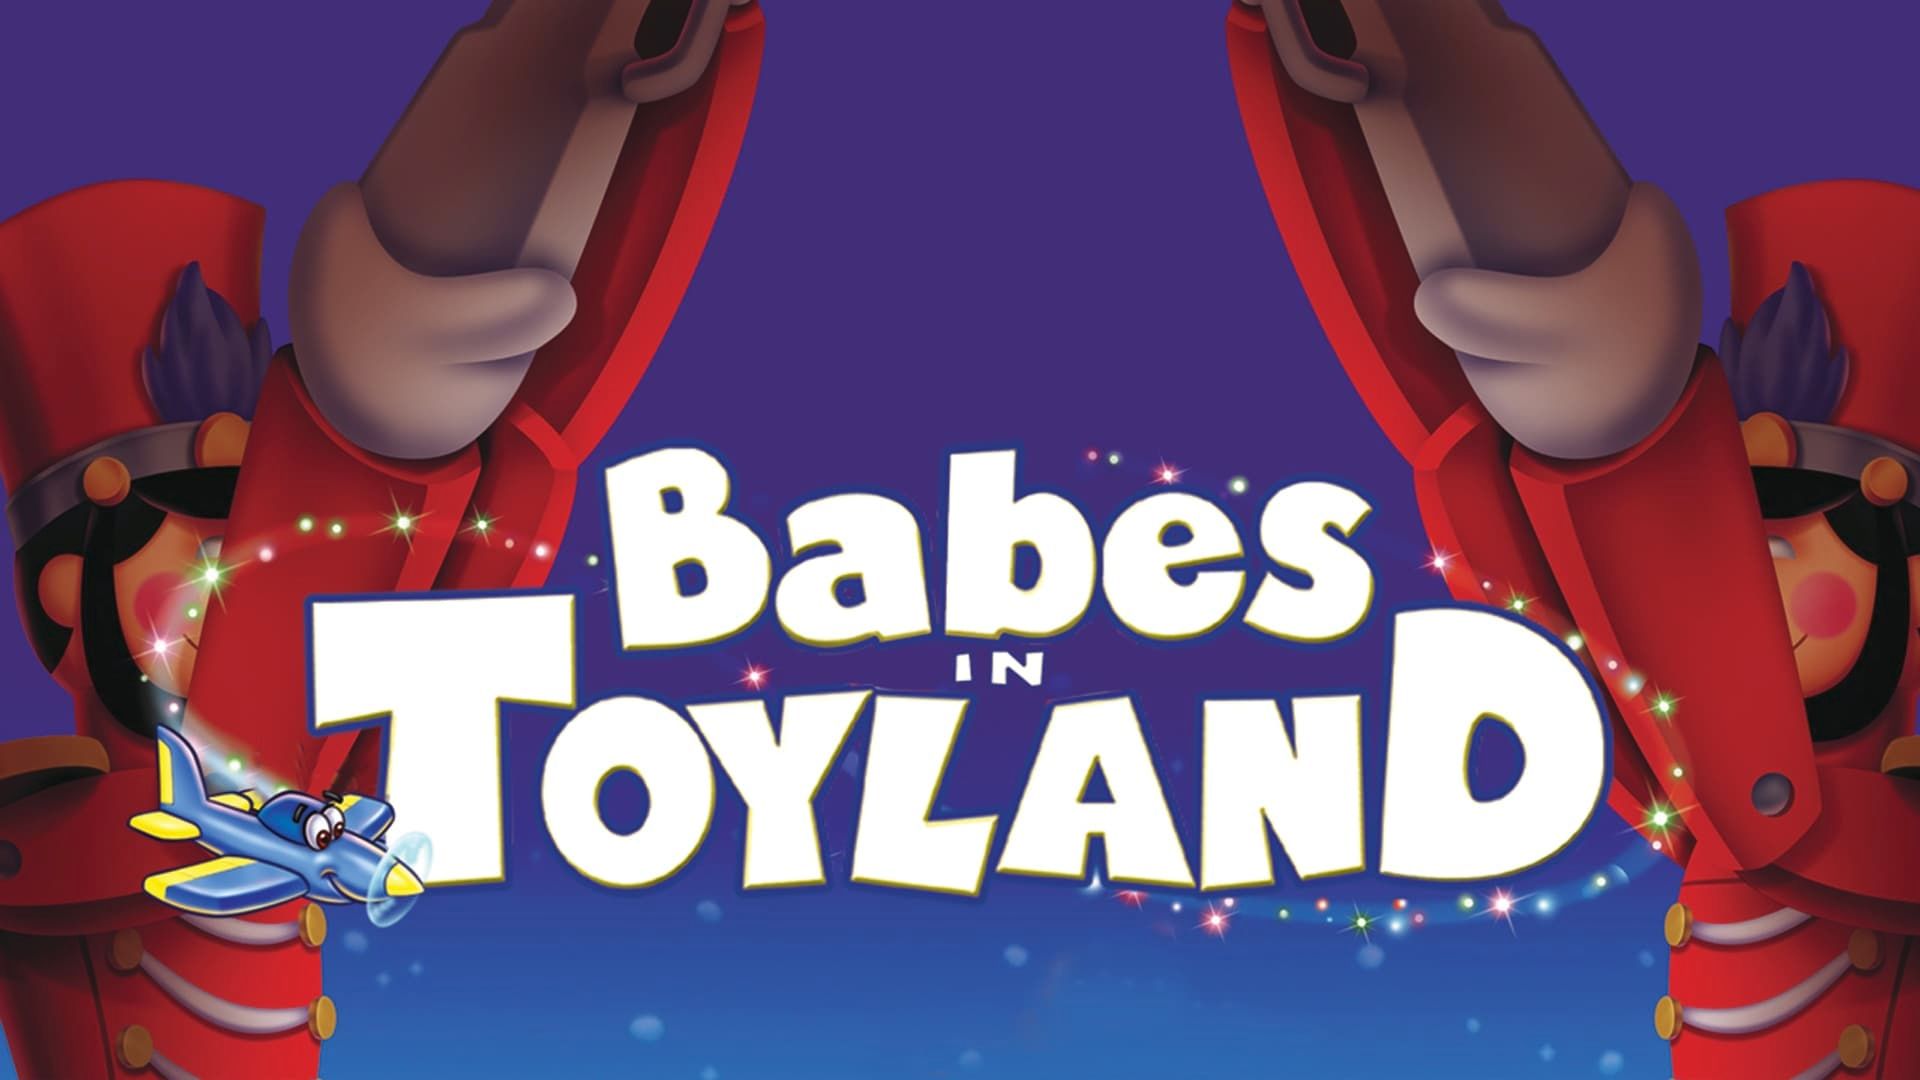 Babes in Toyland background